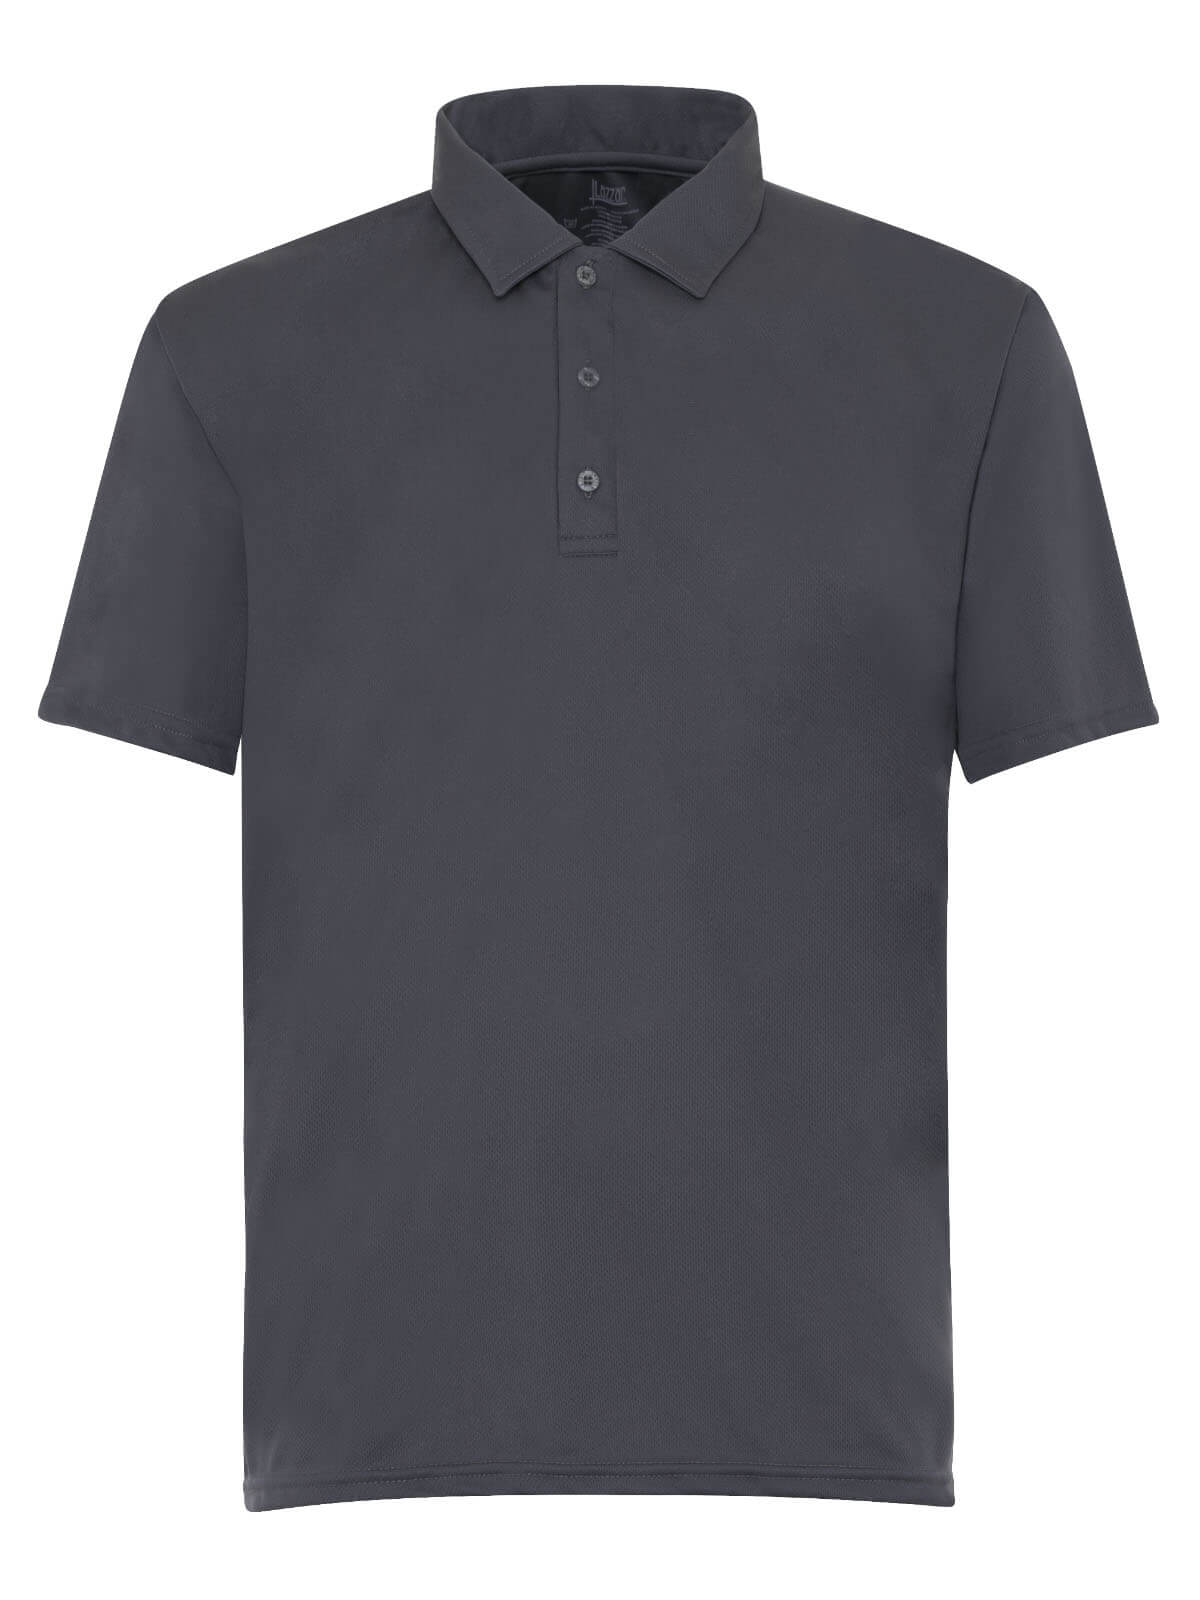 dry fit polo shirt gray